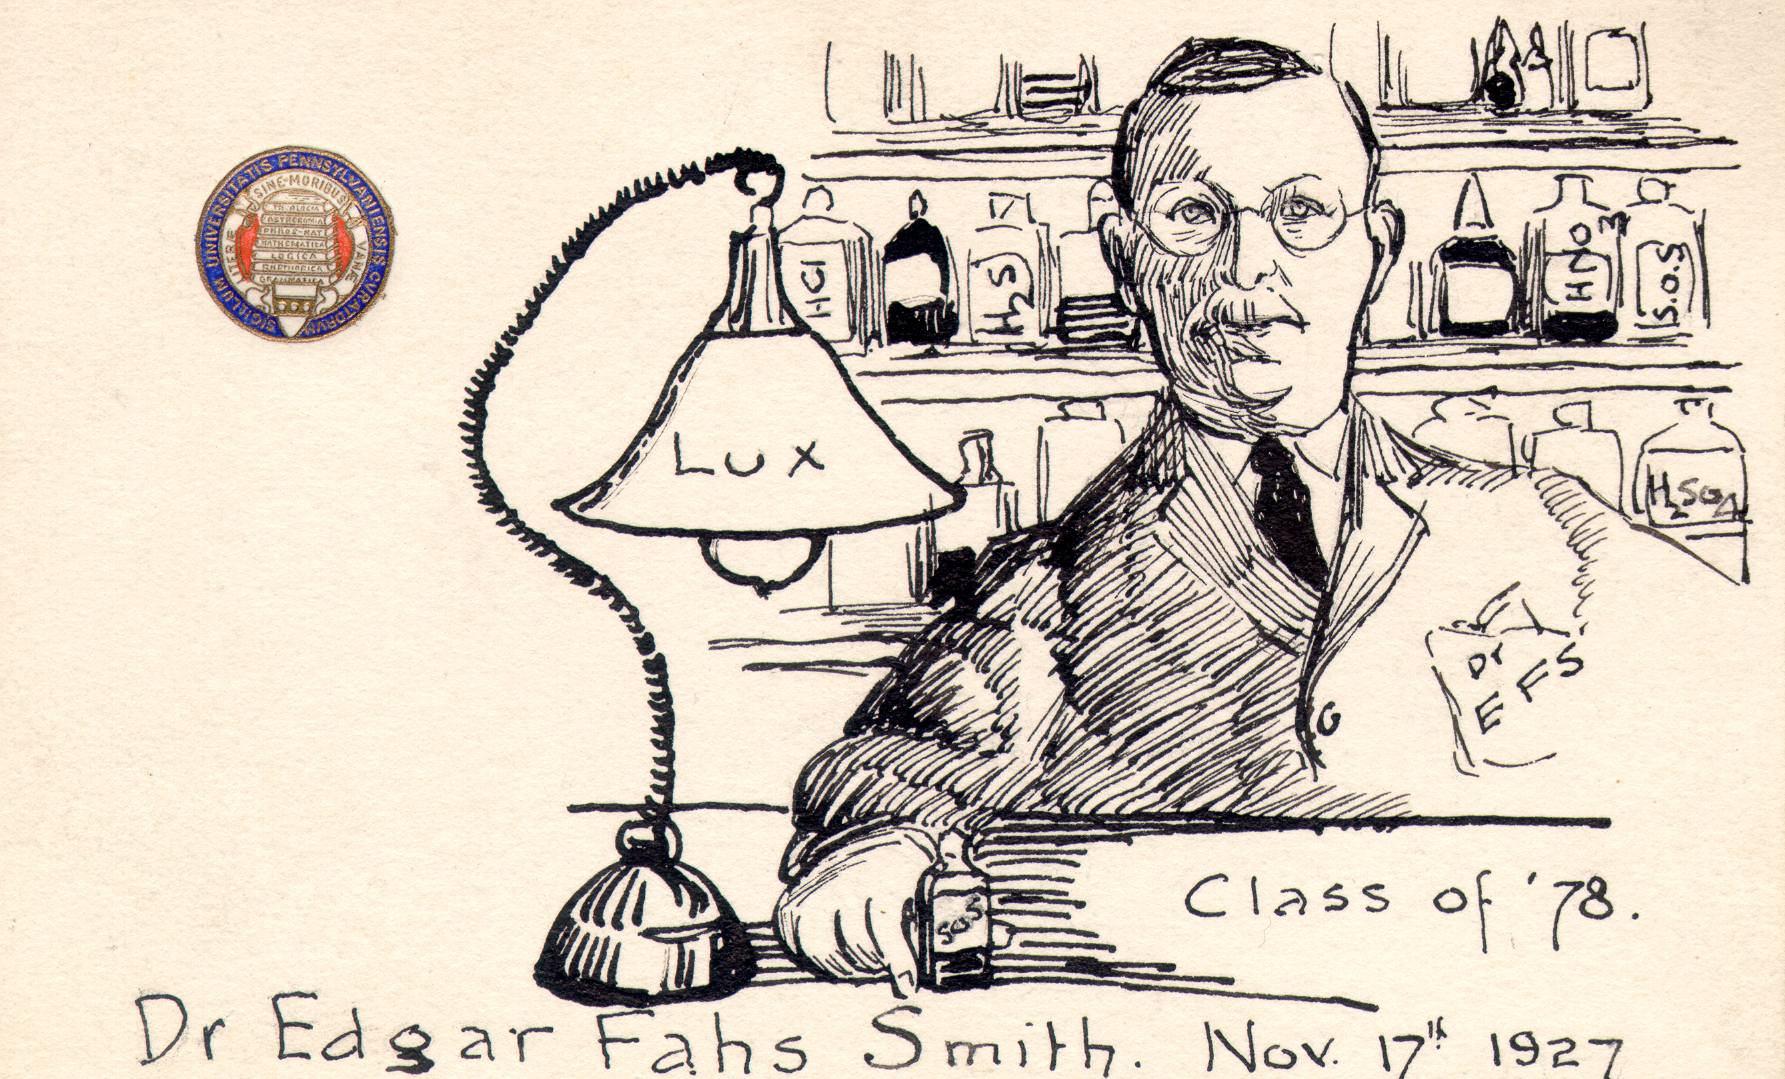 edgar fahs smith, drawn with glasses, a moustache, and a lab coat with "Dr EFS" on the front pocket, in front of bottles of chemicals and next to a lamp with "lux" written on it. "Class of '78" and "Dr Edgar Fahs Smith, Nov 17th 1927" are written across the bottom of the drawing, and the upper left hand corner has a seal